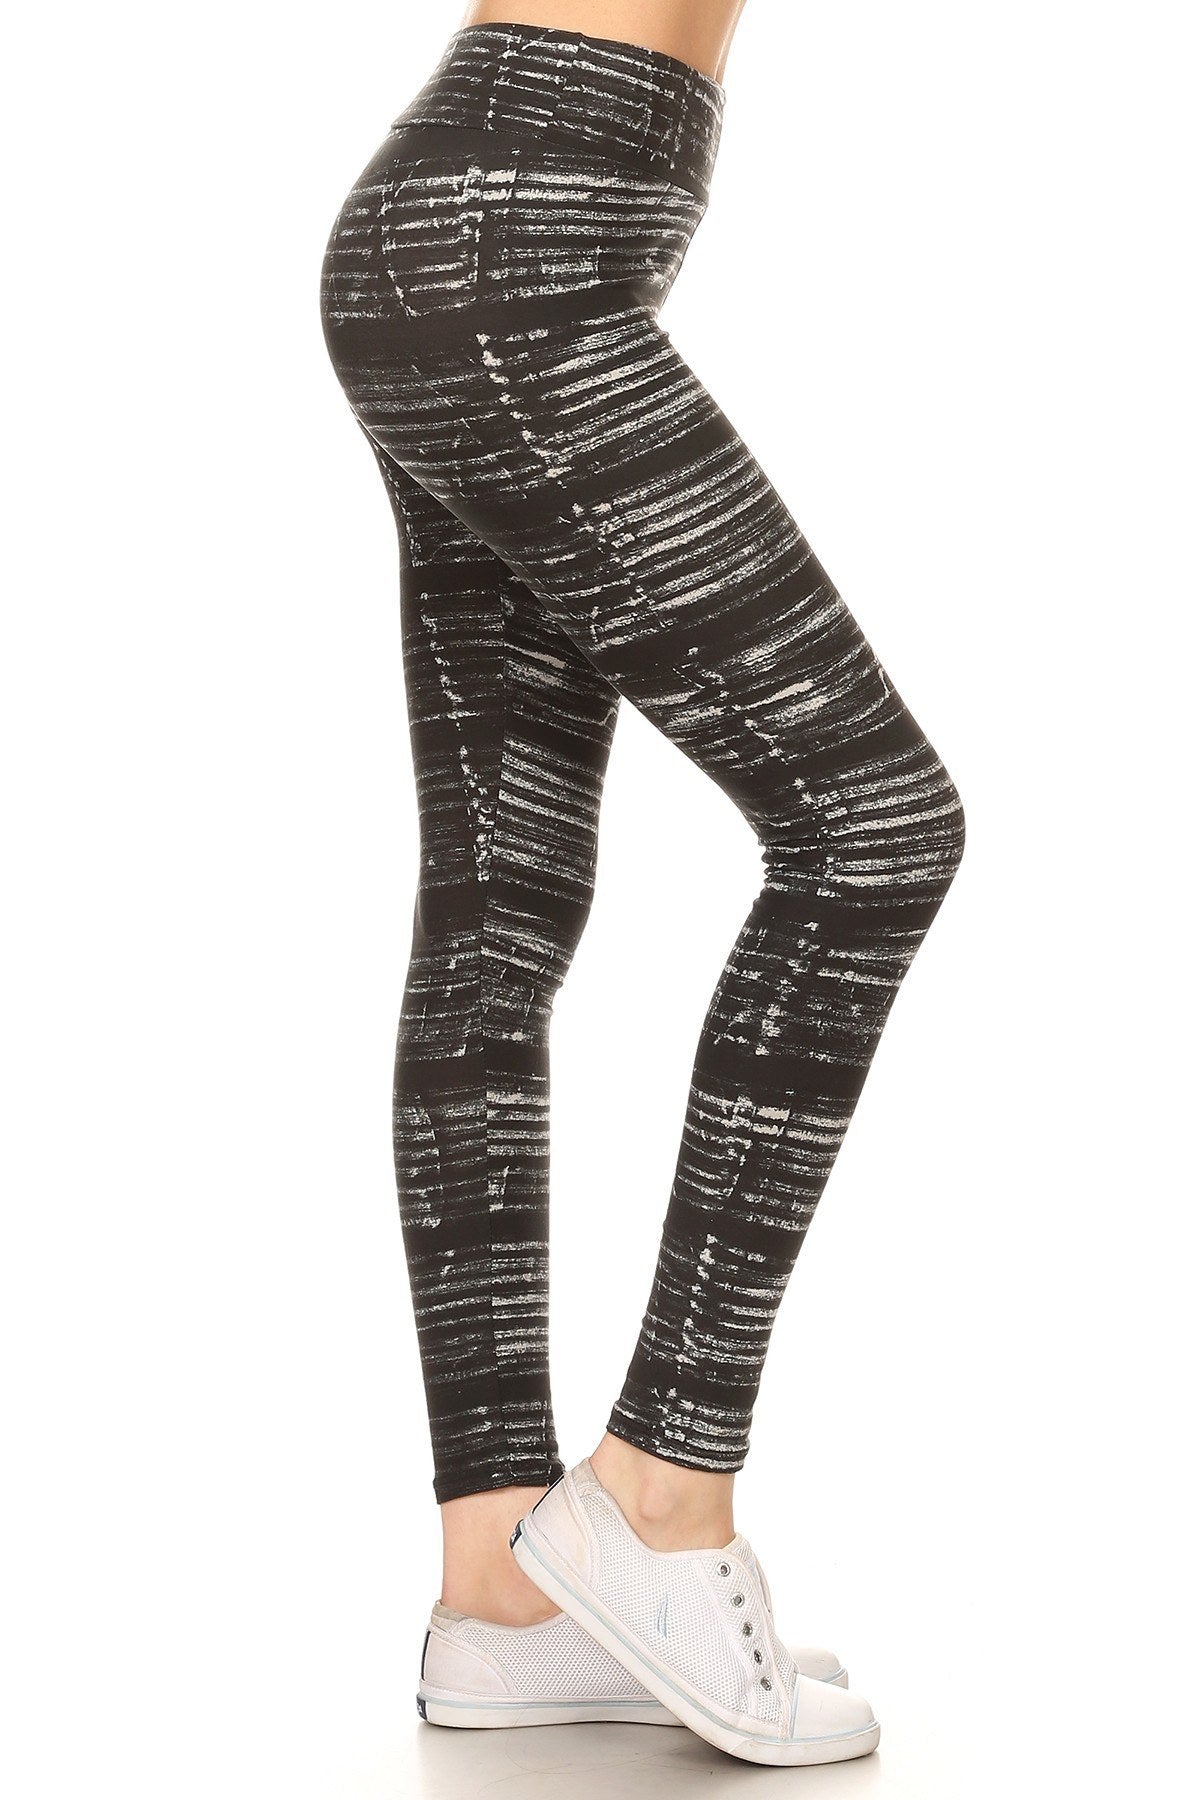 Yoga Style Banded Lined Multicolor Print, Full Length Leggings In A Slim Fitting Style With A Banded High Waist - Love It Clothing